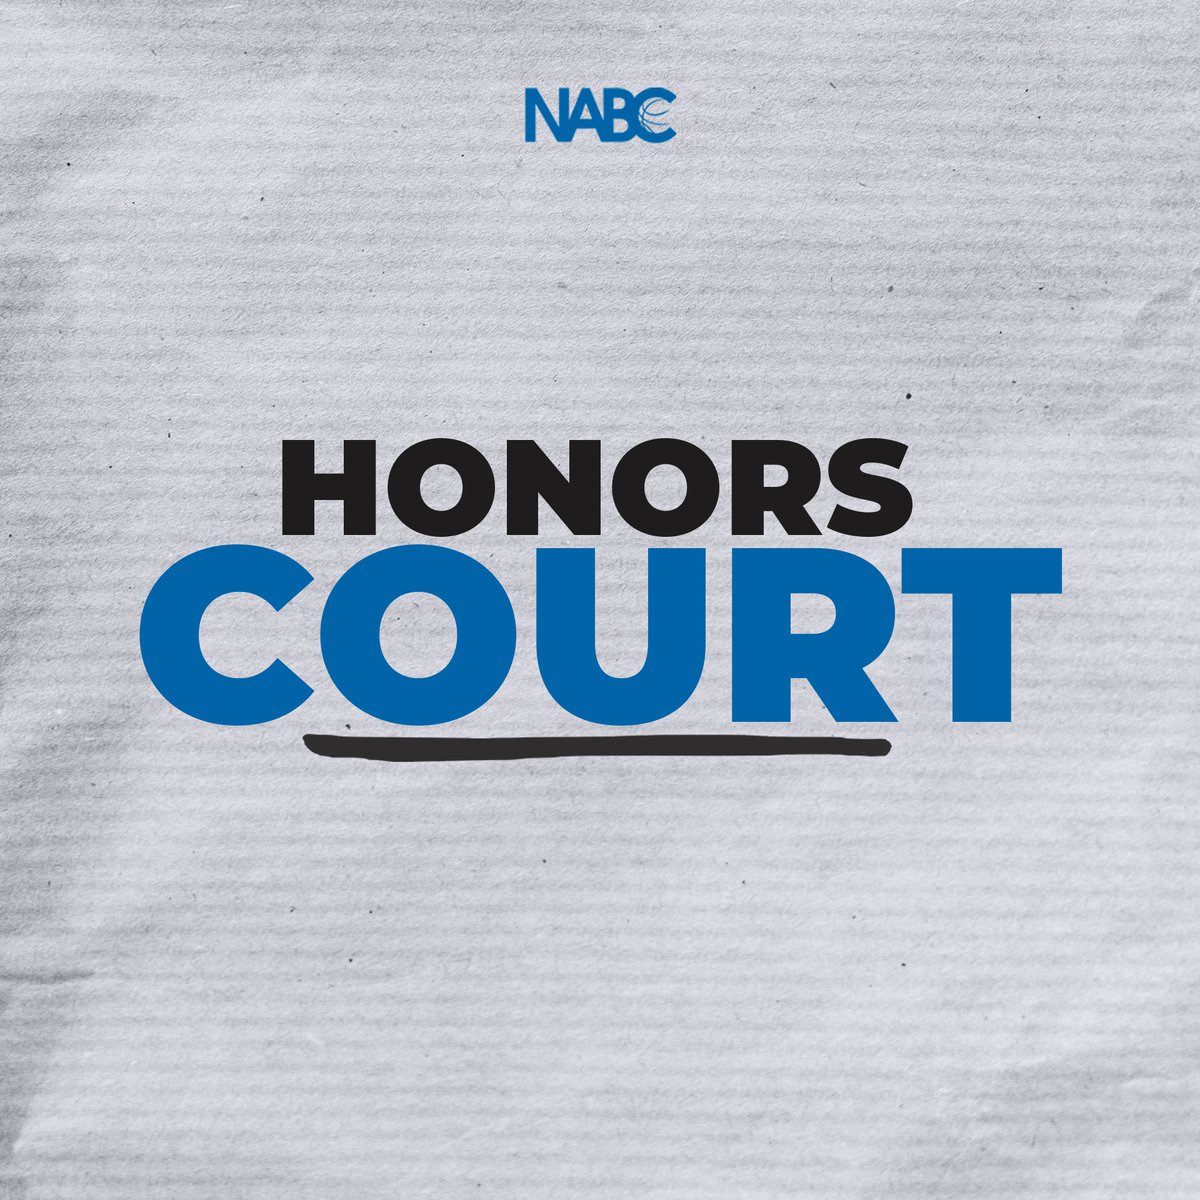 Celebrating champions in the classroom! Nominations are now open for the 2023-24 NABC Team Academic Excellence Awards and NABC Honors Court. Members, check your email for nomination details!